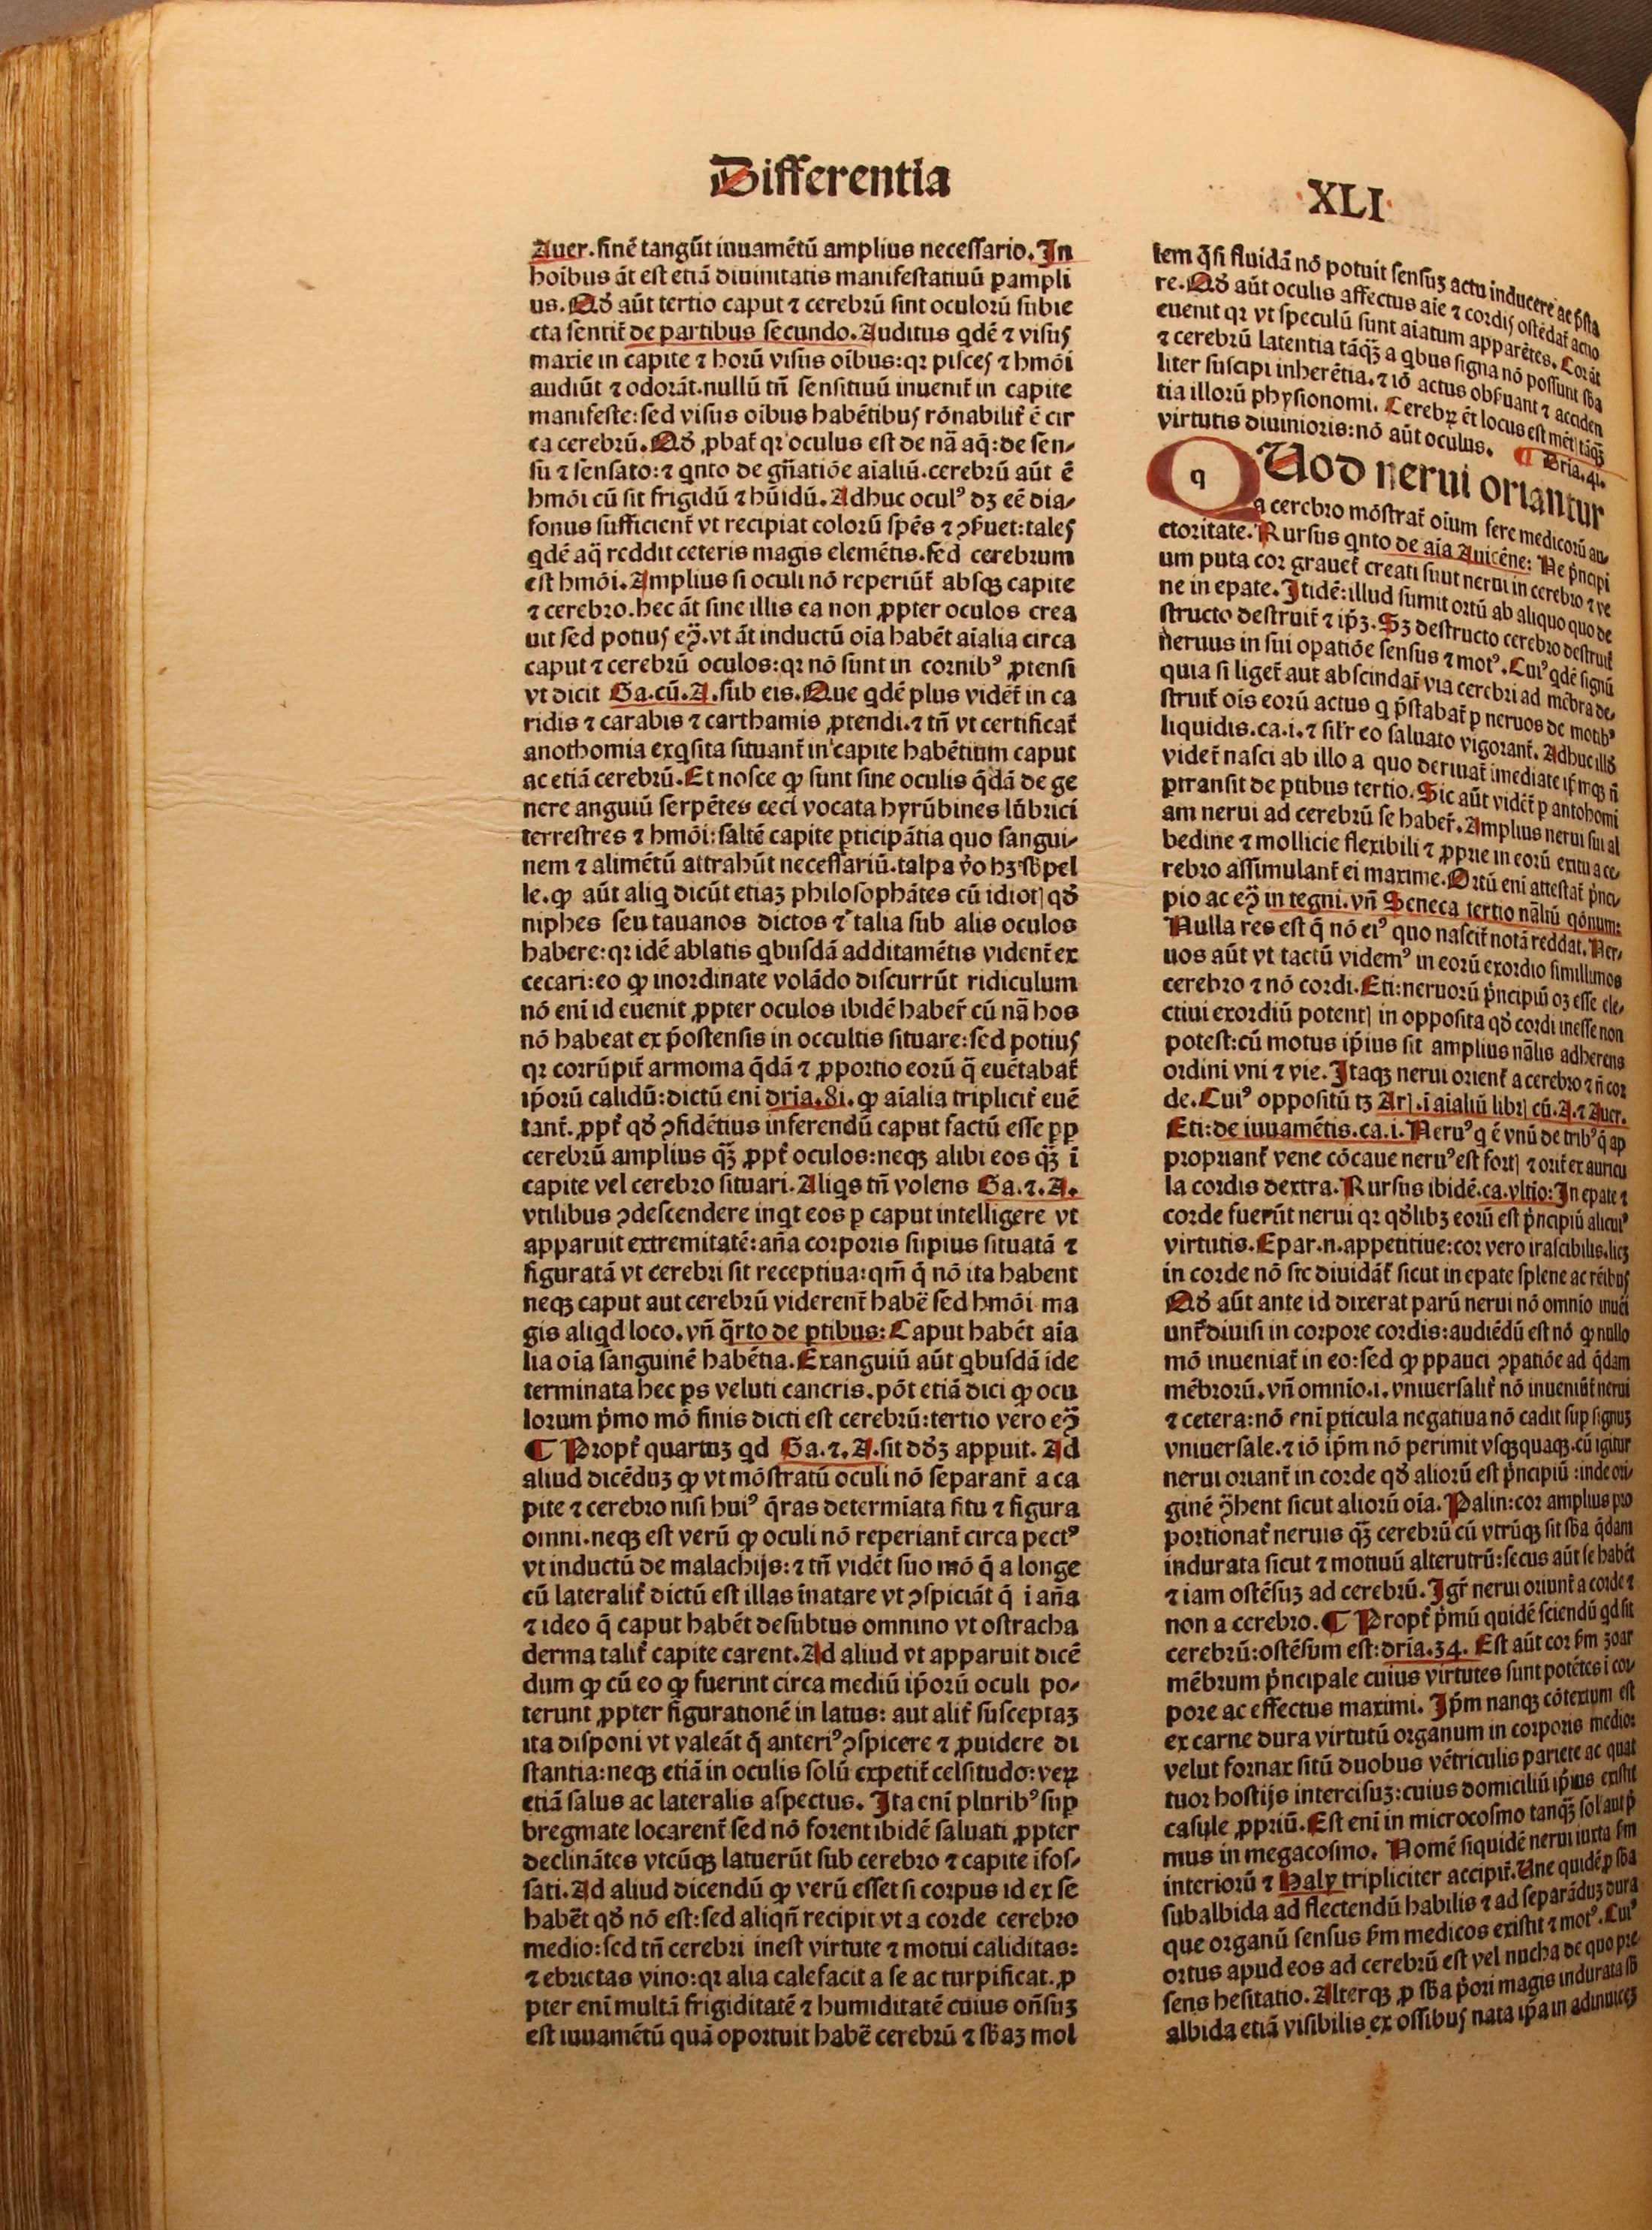 Ill. 2: The philosophical medical works by Petrus de Abano, printed by Johannes Herbort in Venice in 1483